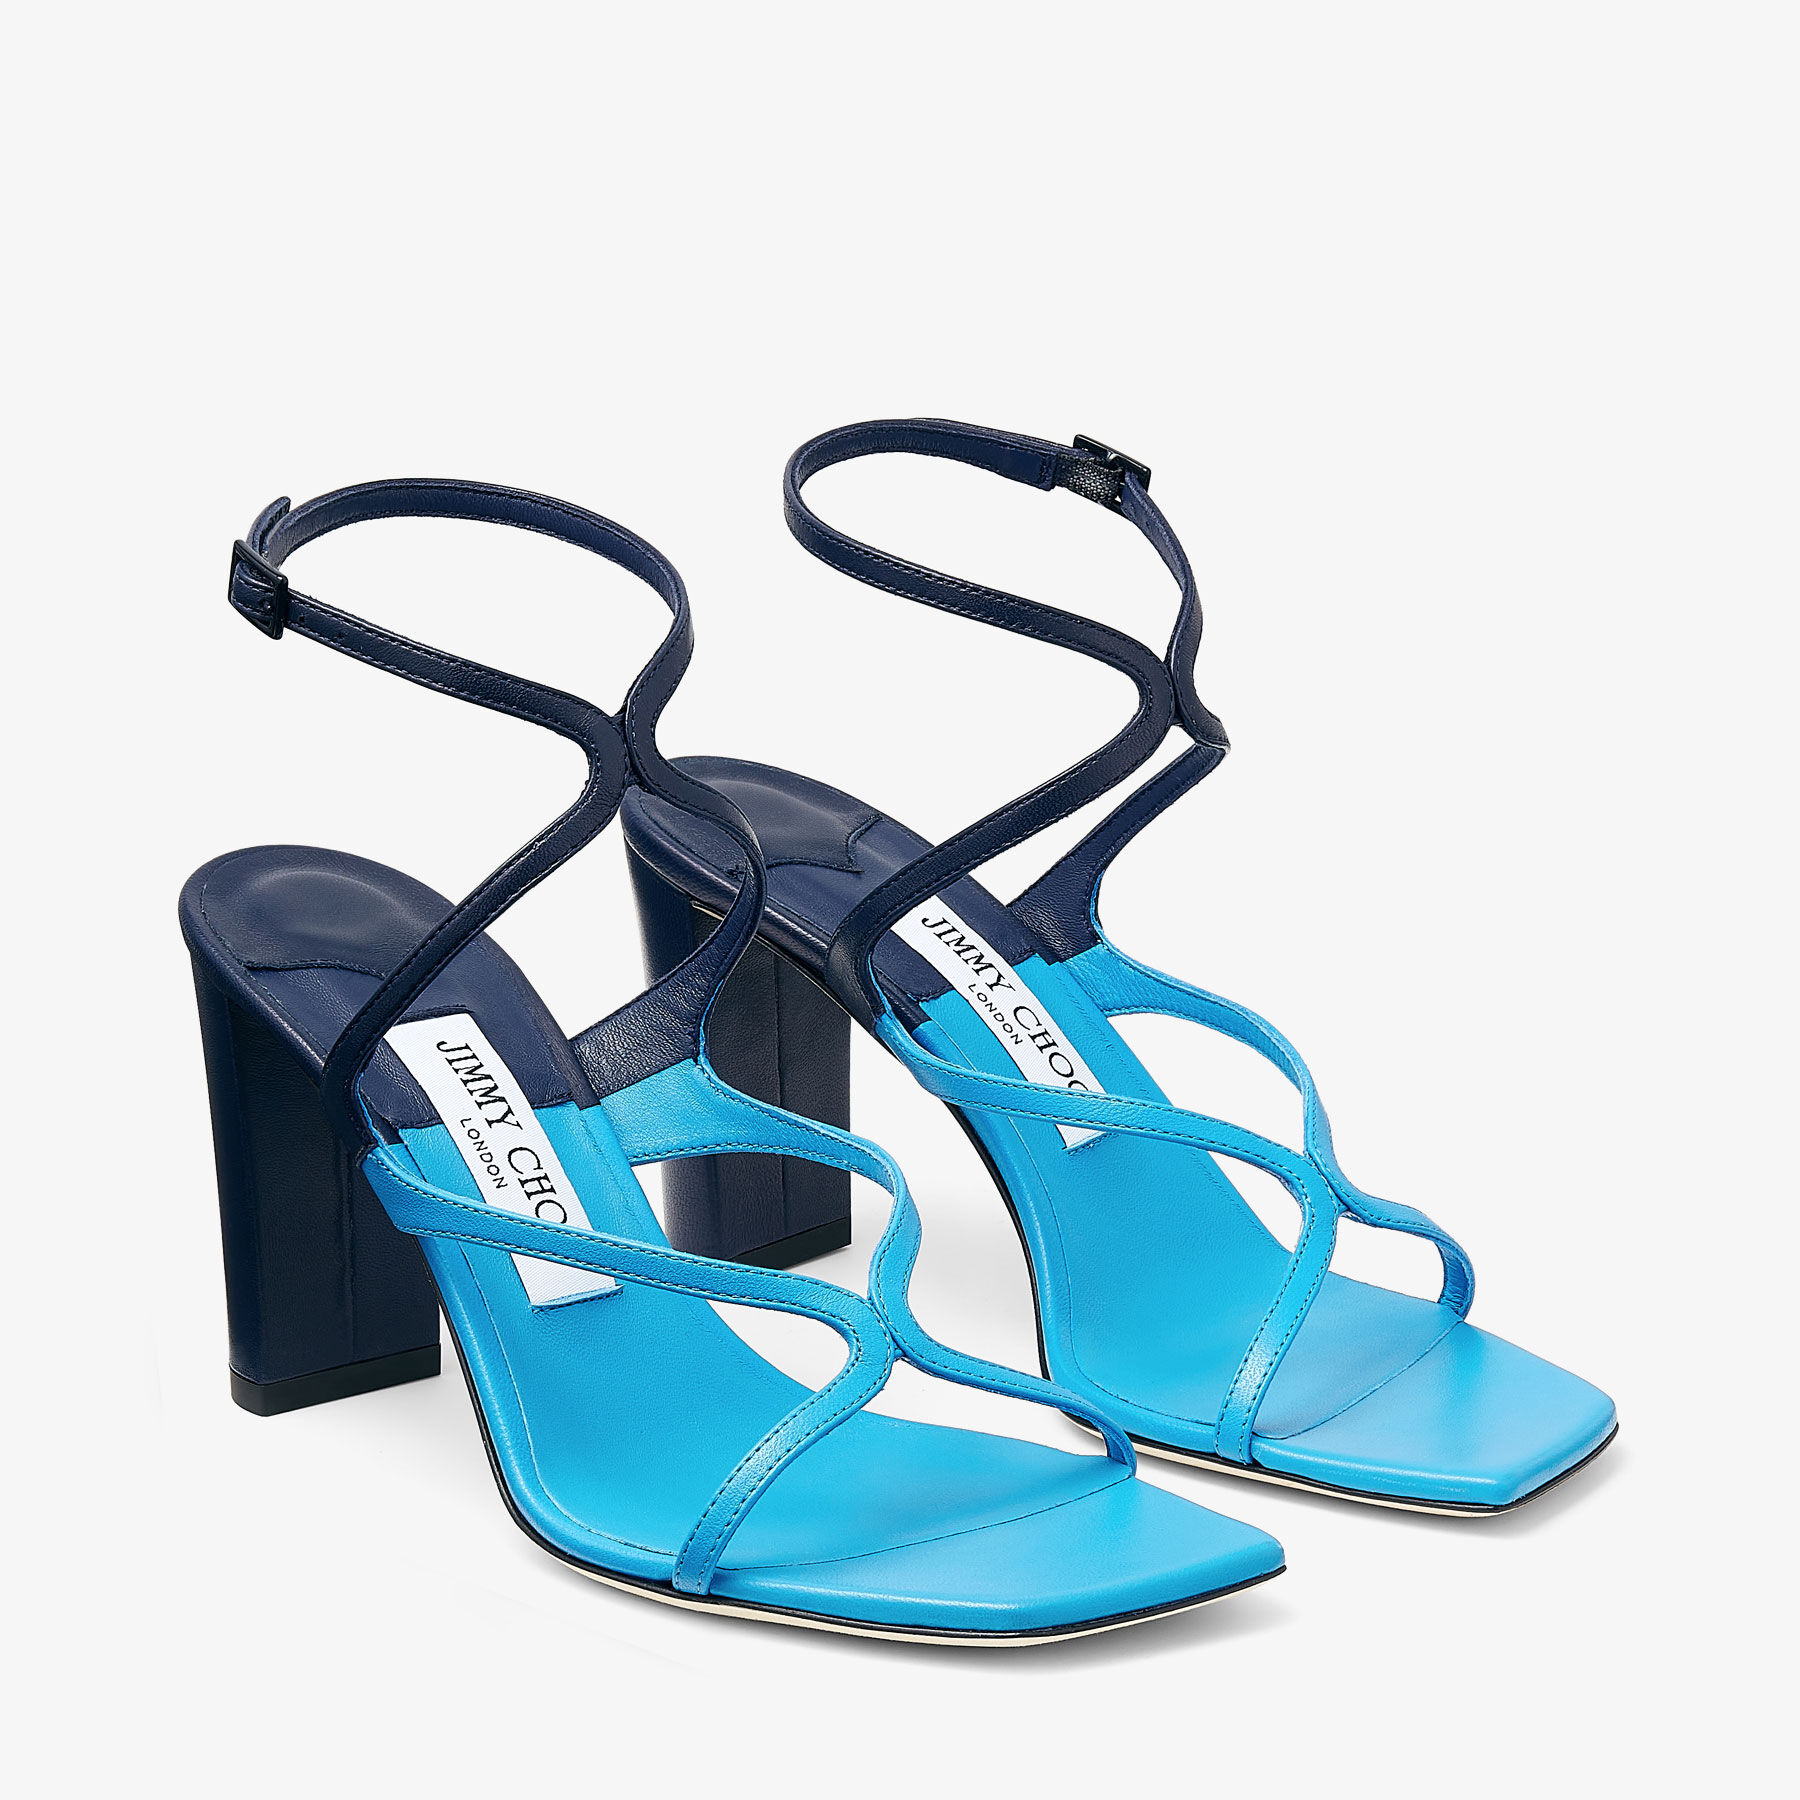 Azie 85 | Sky and Navy Patchwork Nappa Leather Sandals | New 